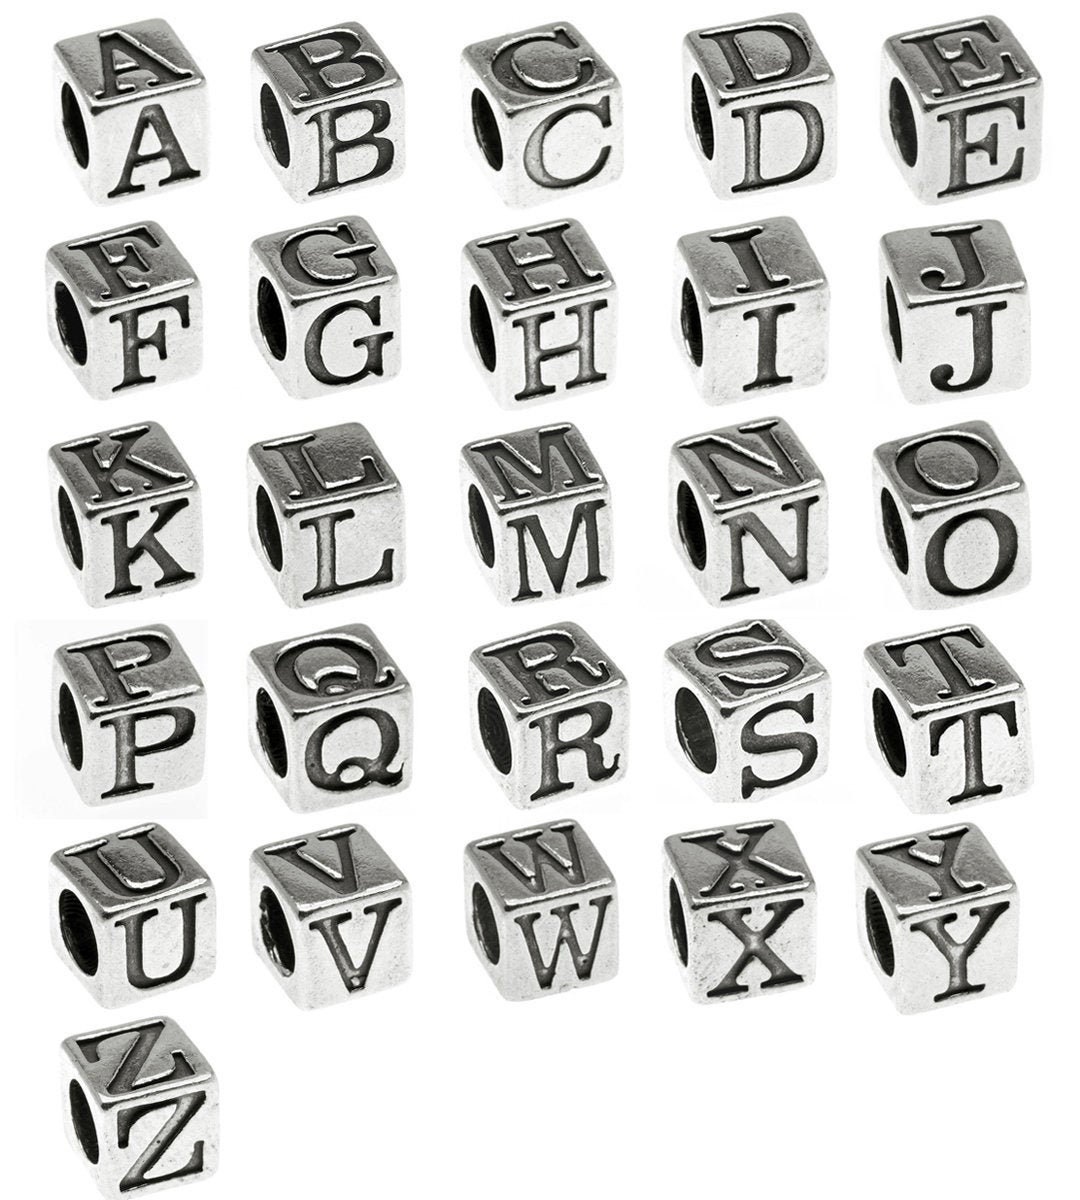 White and Silver Cube Alphabet Letter Beads, Silver Acrylic Letter